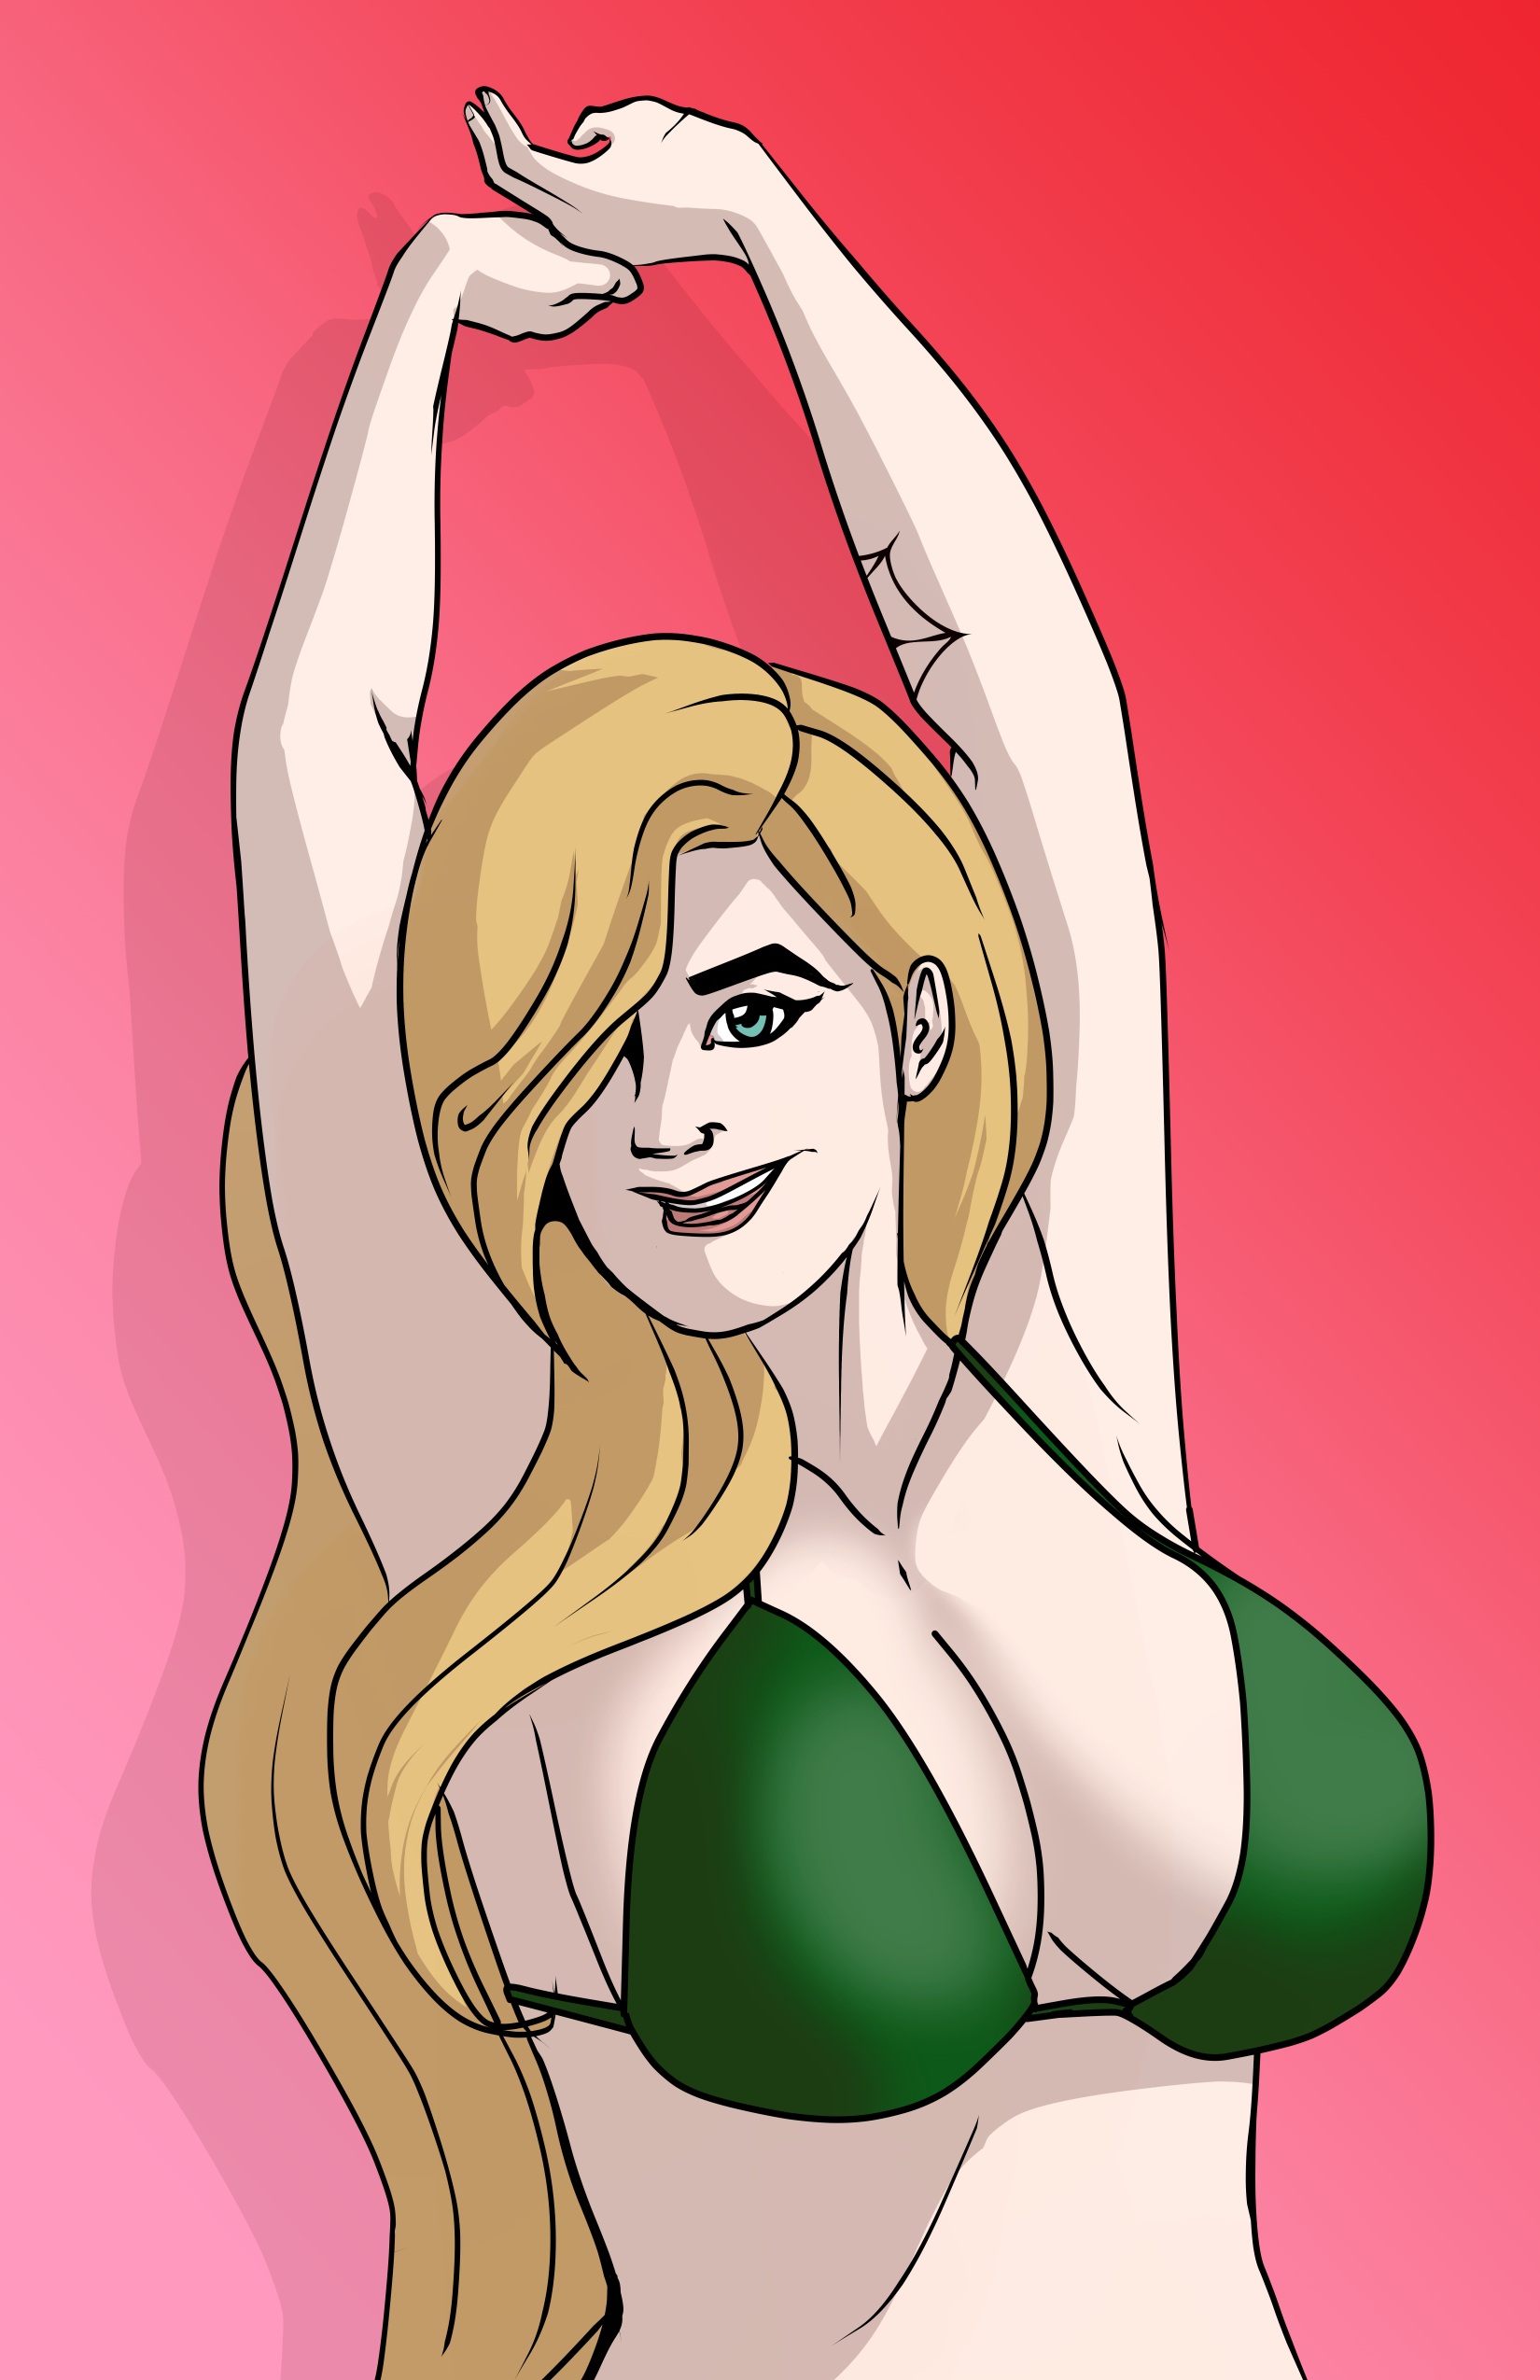 Katie Pin-up. Again.